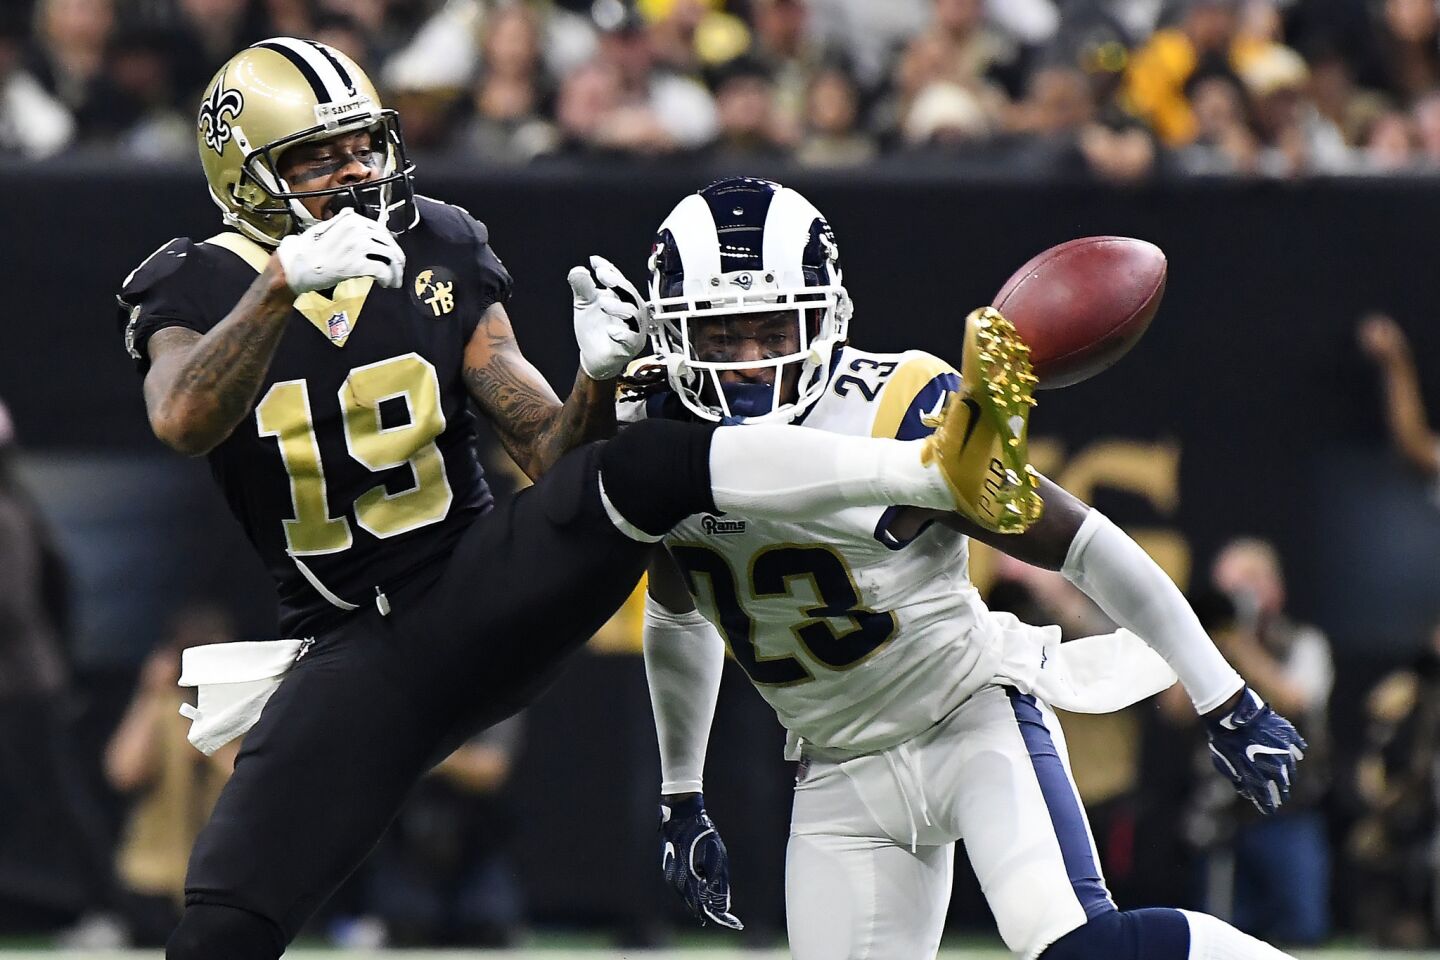 Rams conterback Nickell Robey-Coleman knocks the ball away from New Orleans Saints receiver Ted Gin Jr. in the fourth quarter in the NFC Championship at the Superdome in New Orleans Sunday.